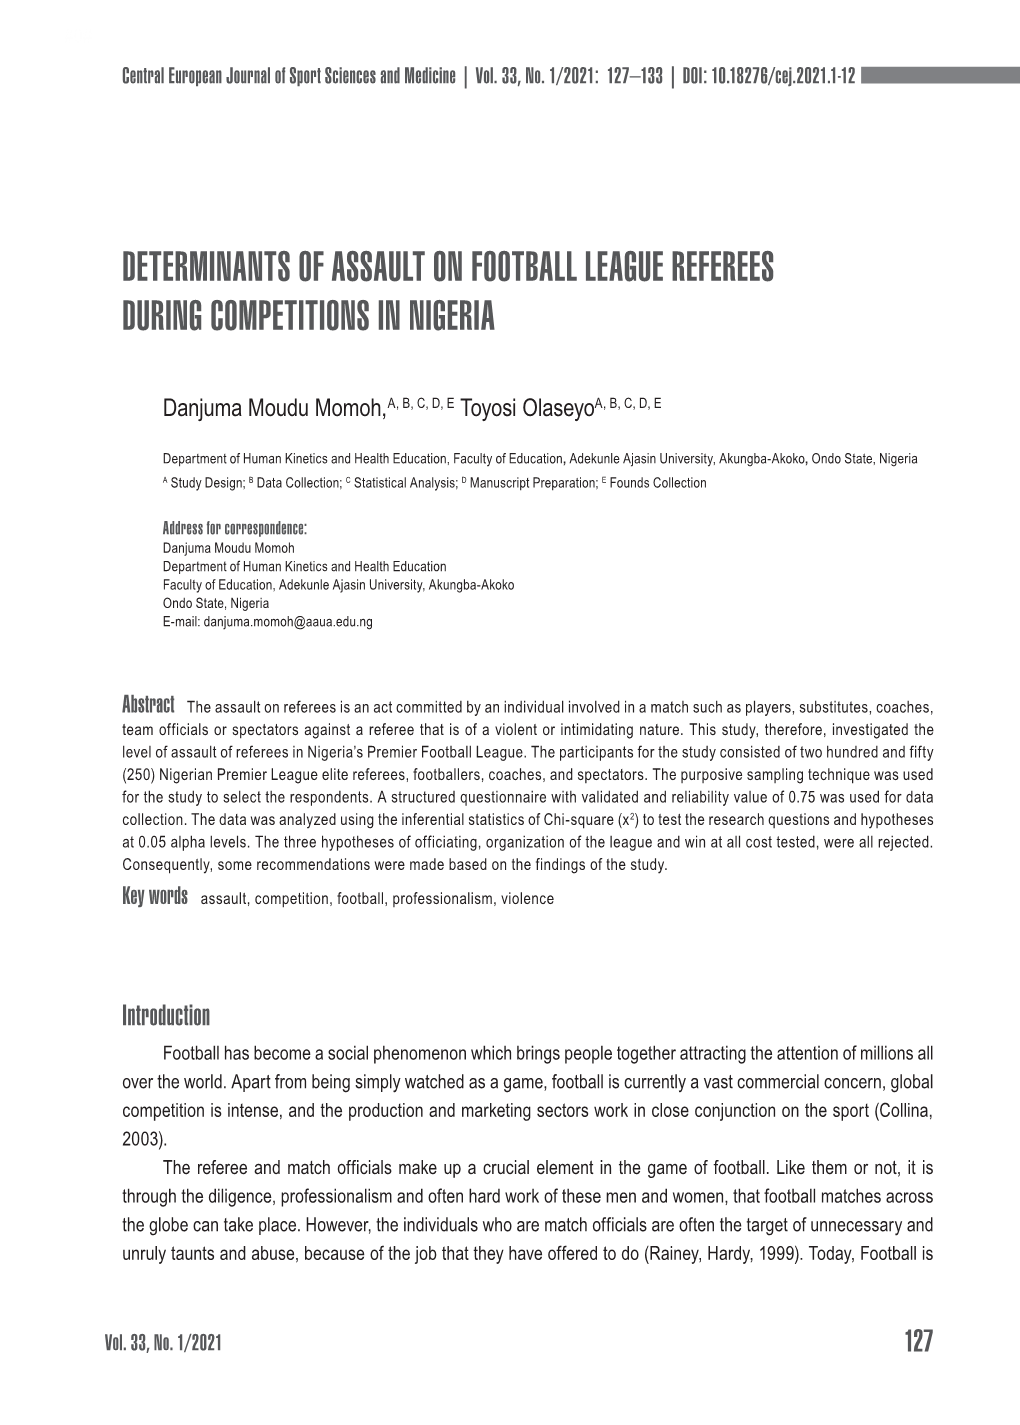 Determinants of Assault on Football League Referees During Competitions in Nigeria